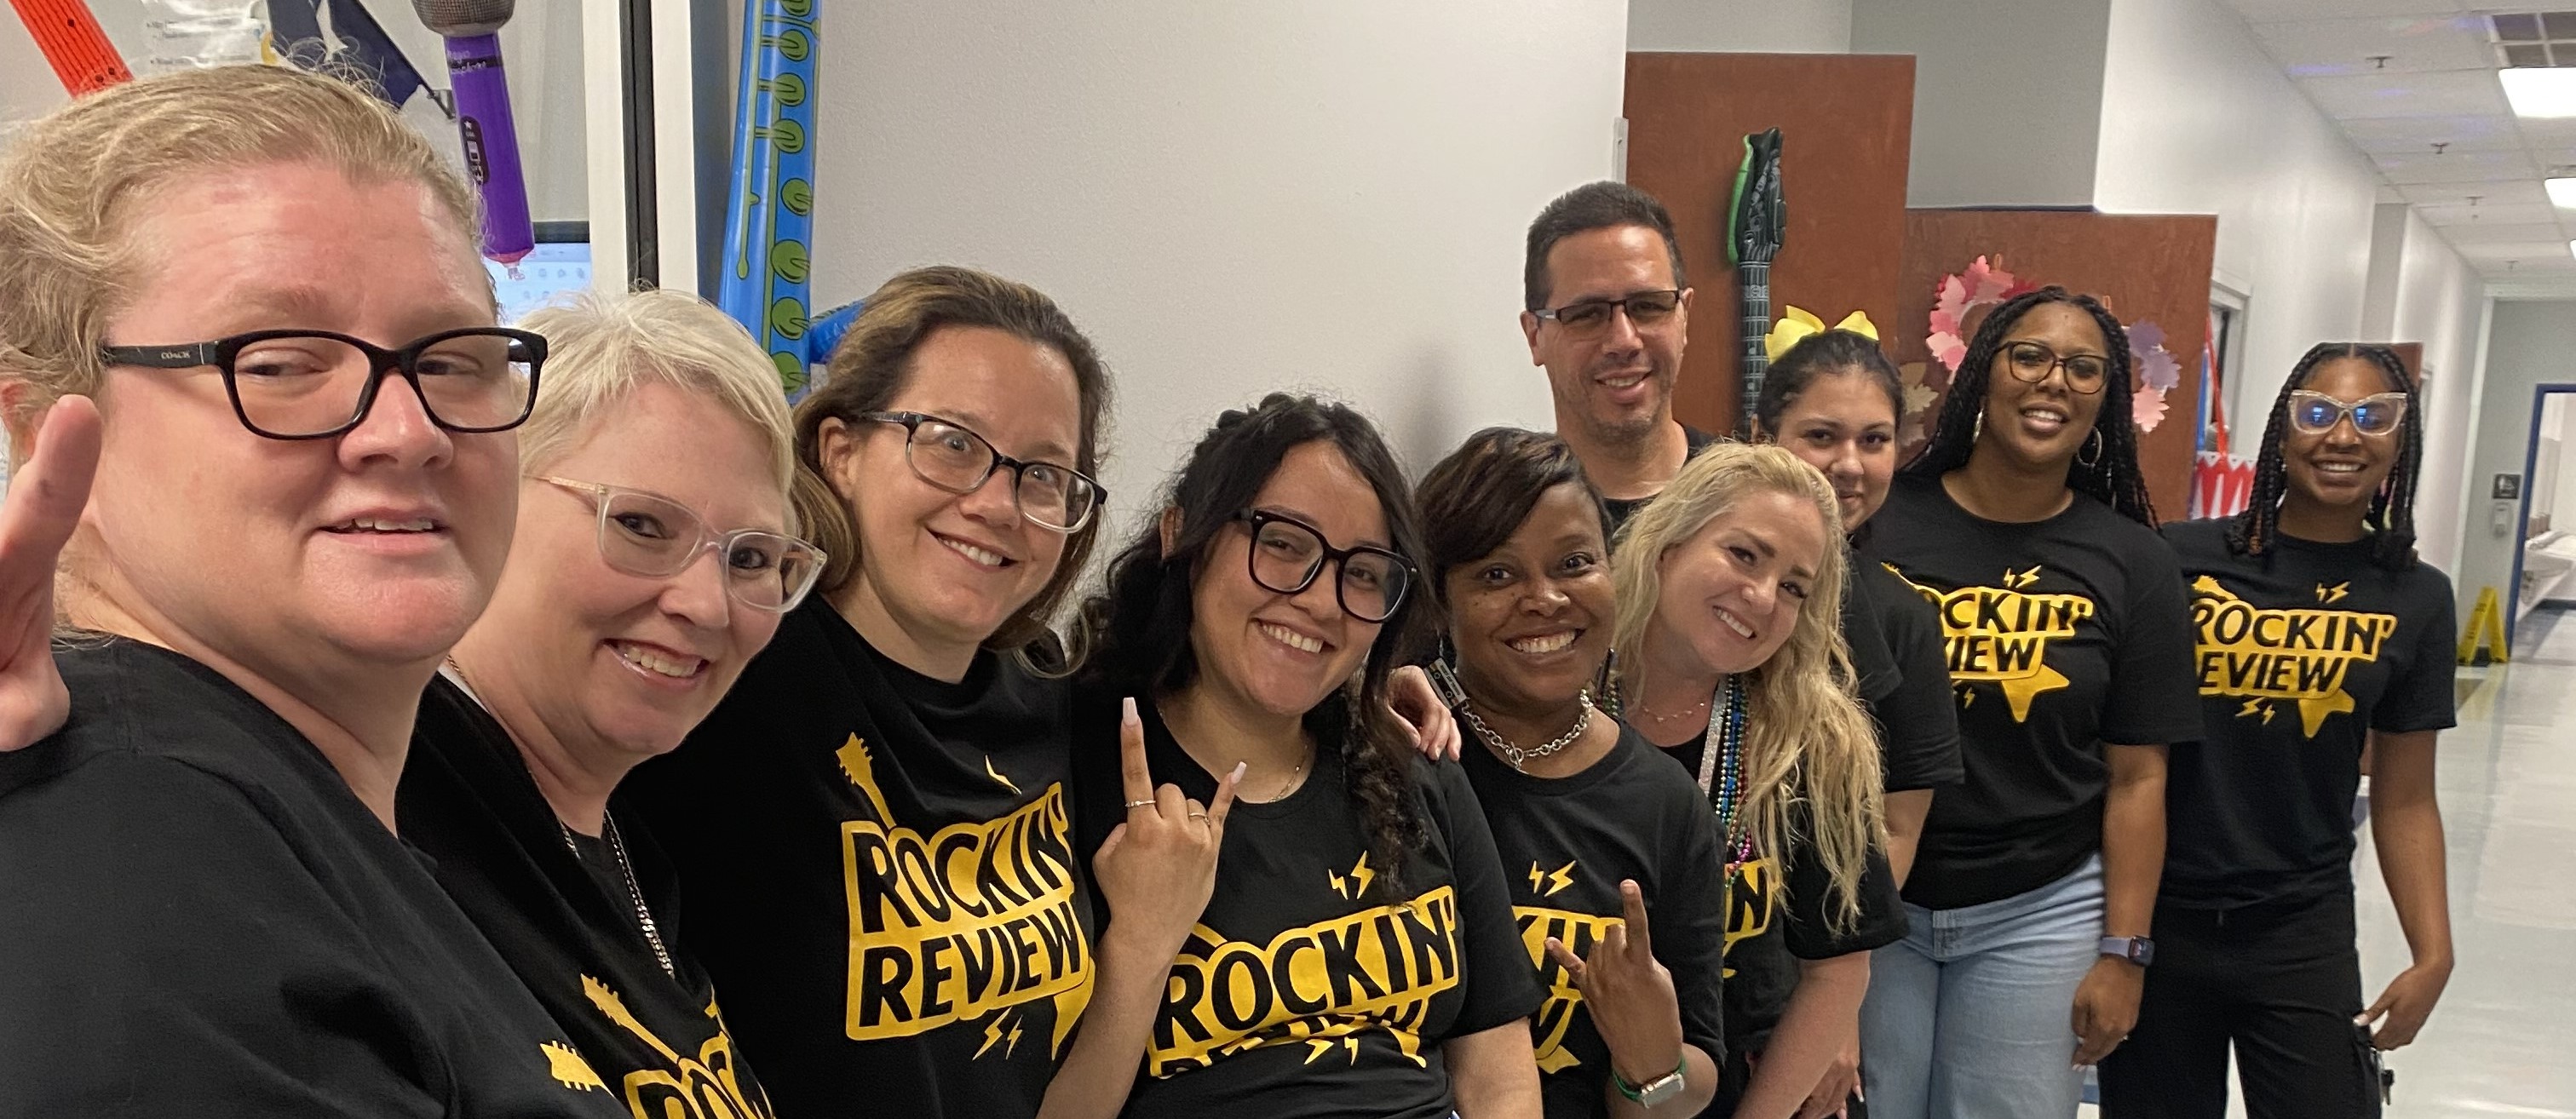 STAAR Rockin' Review T-Shirt Staff Line-up: Staff Members Behind  One Another in a Line